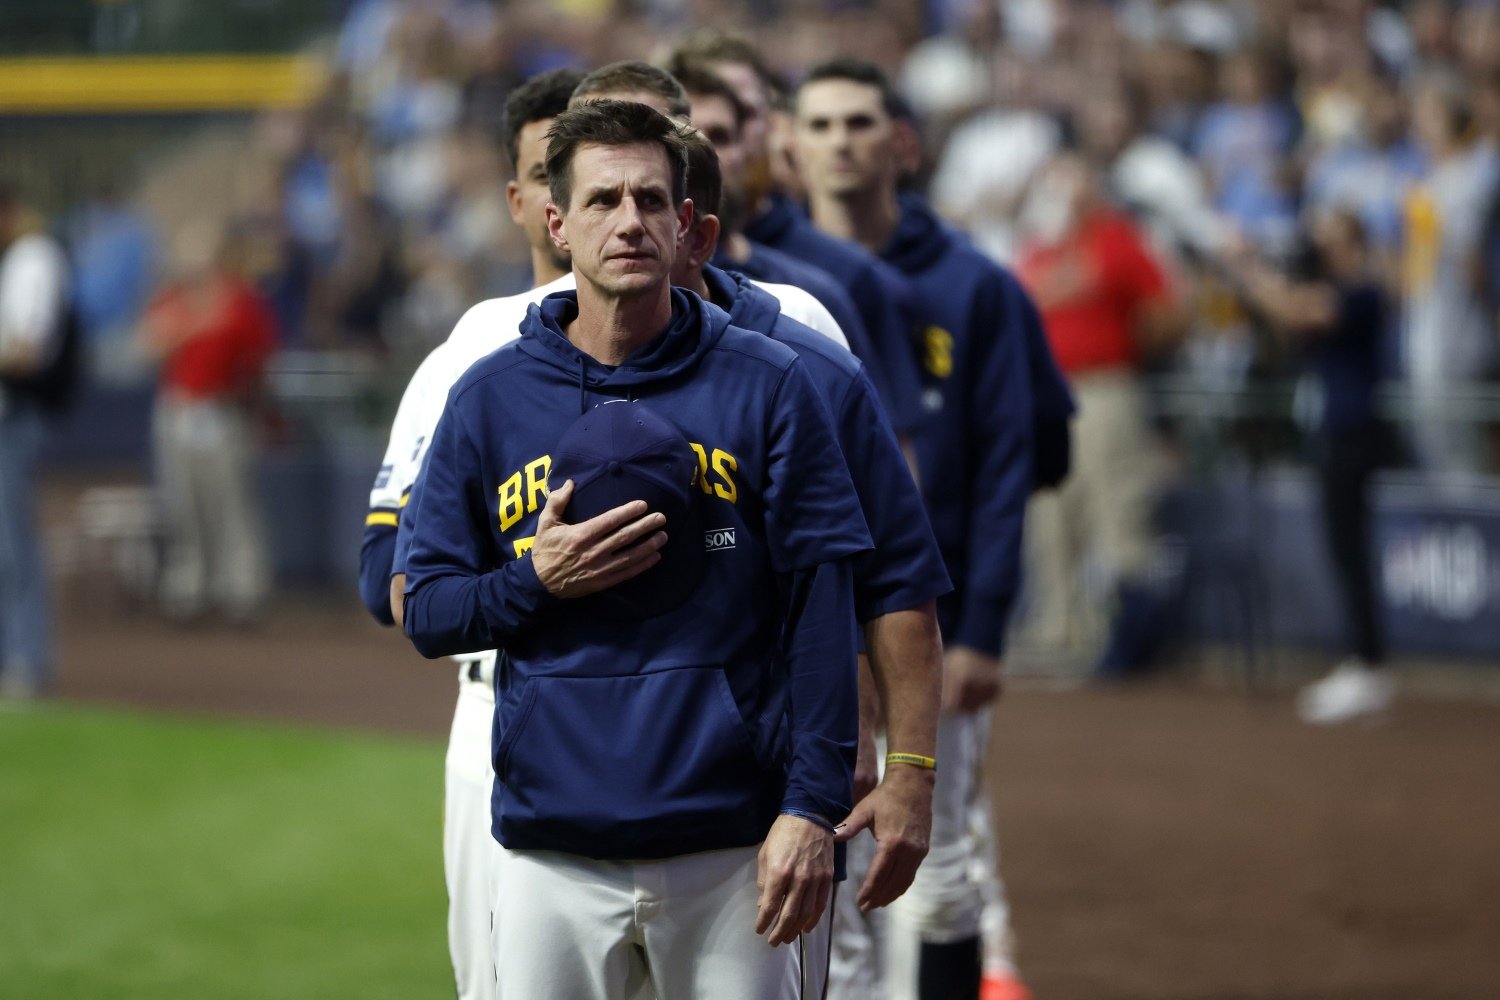 Is Playoff Craig Counsell a Lesser Beast Than the Regular Season